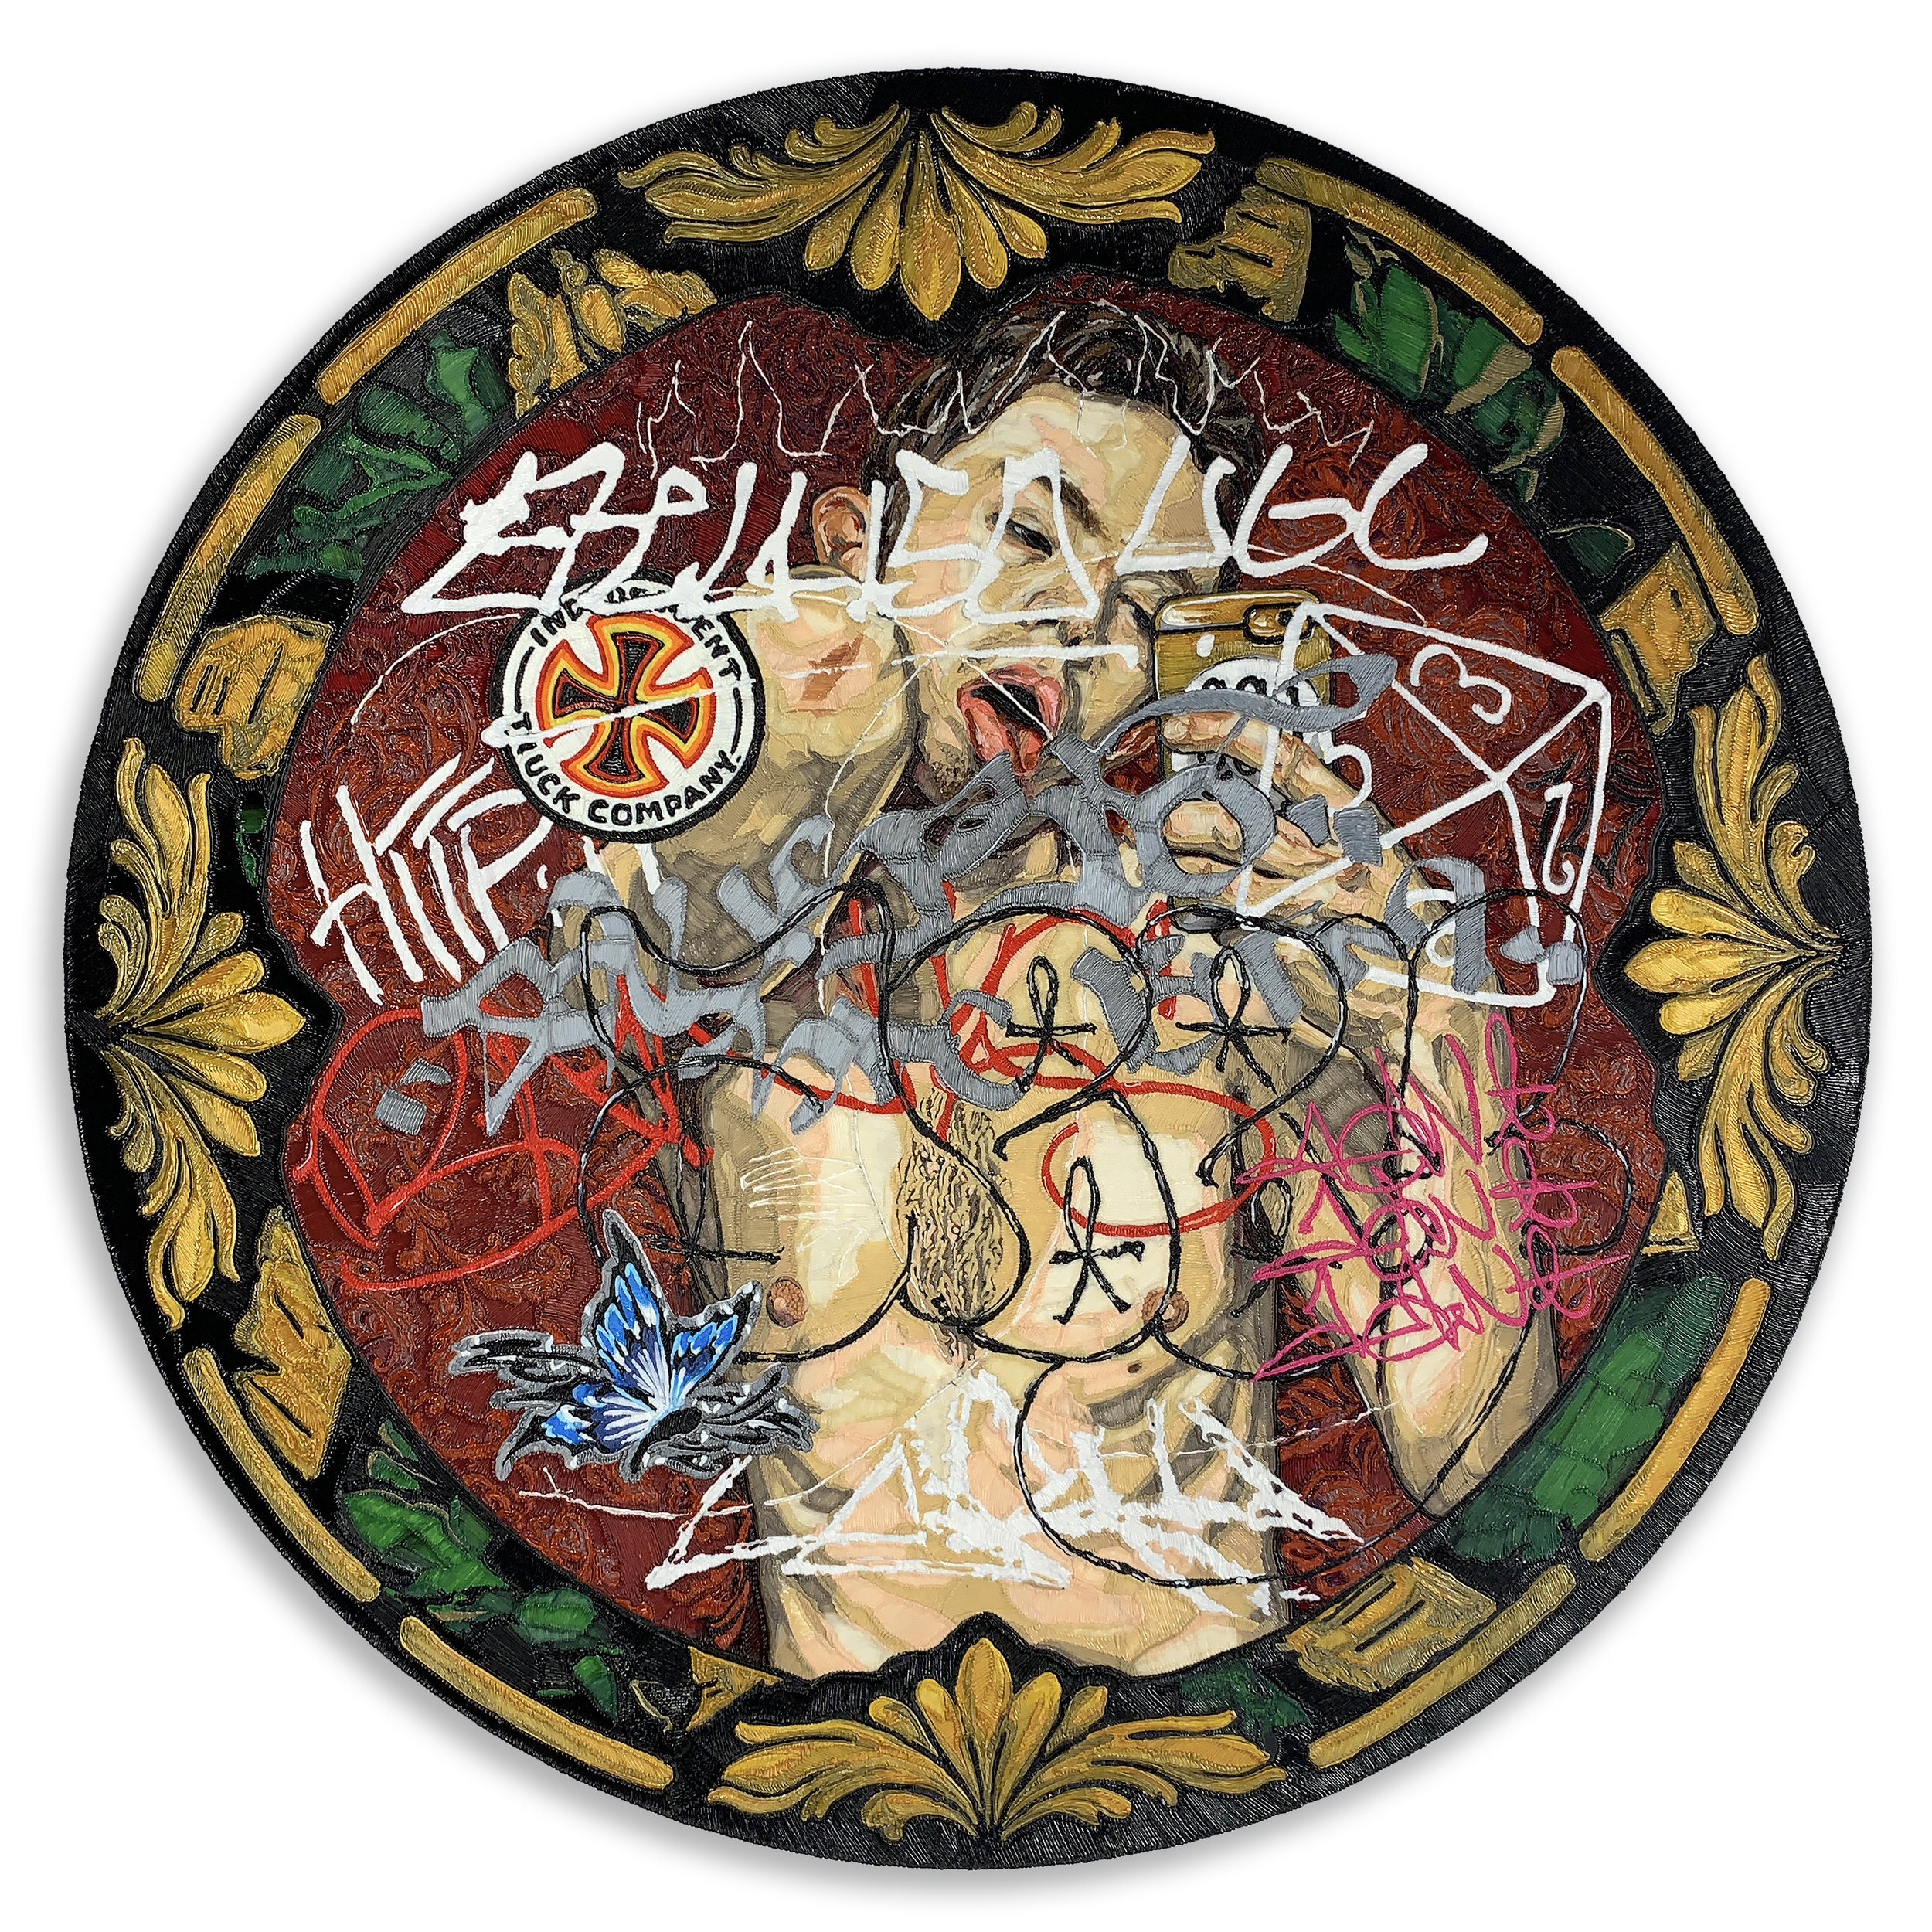  END OF AN ERA, 36 inches in diameter, PLA on panel, 2019 